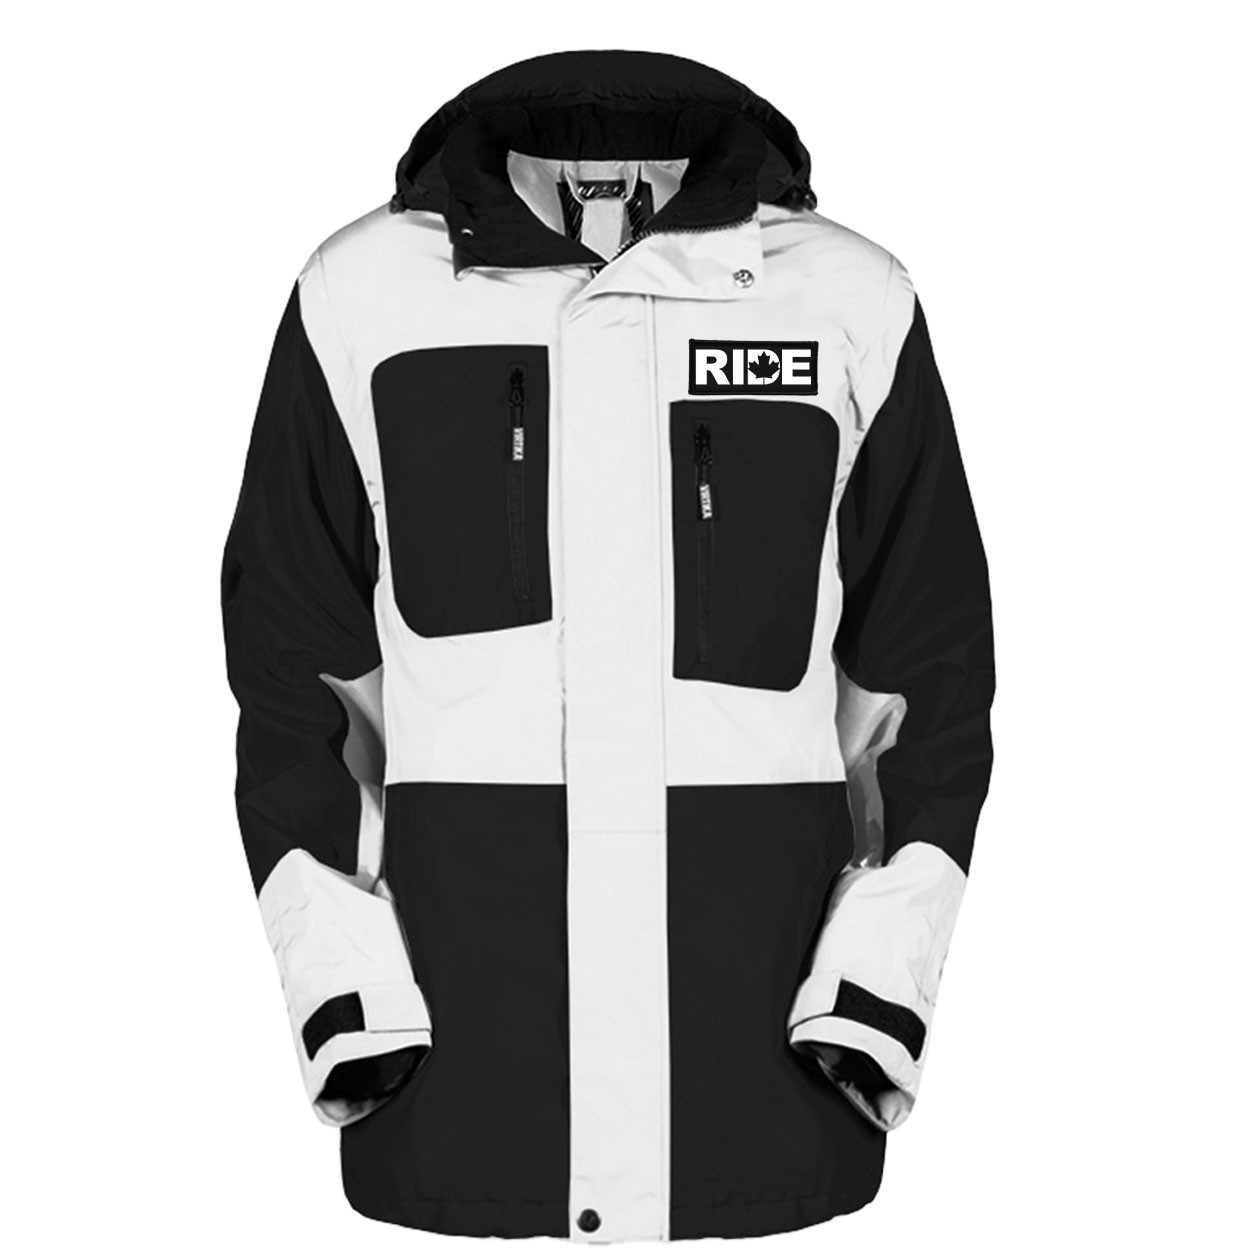 Ride Canada Classic Woven Patch Pro Snowboard Jacket (Black/White)